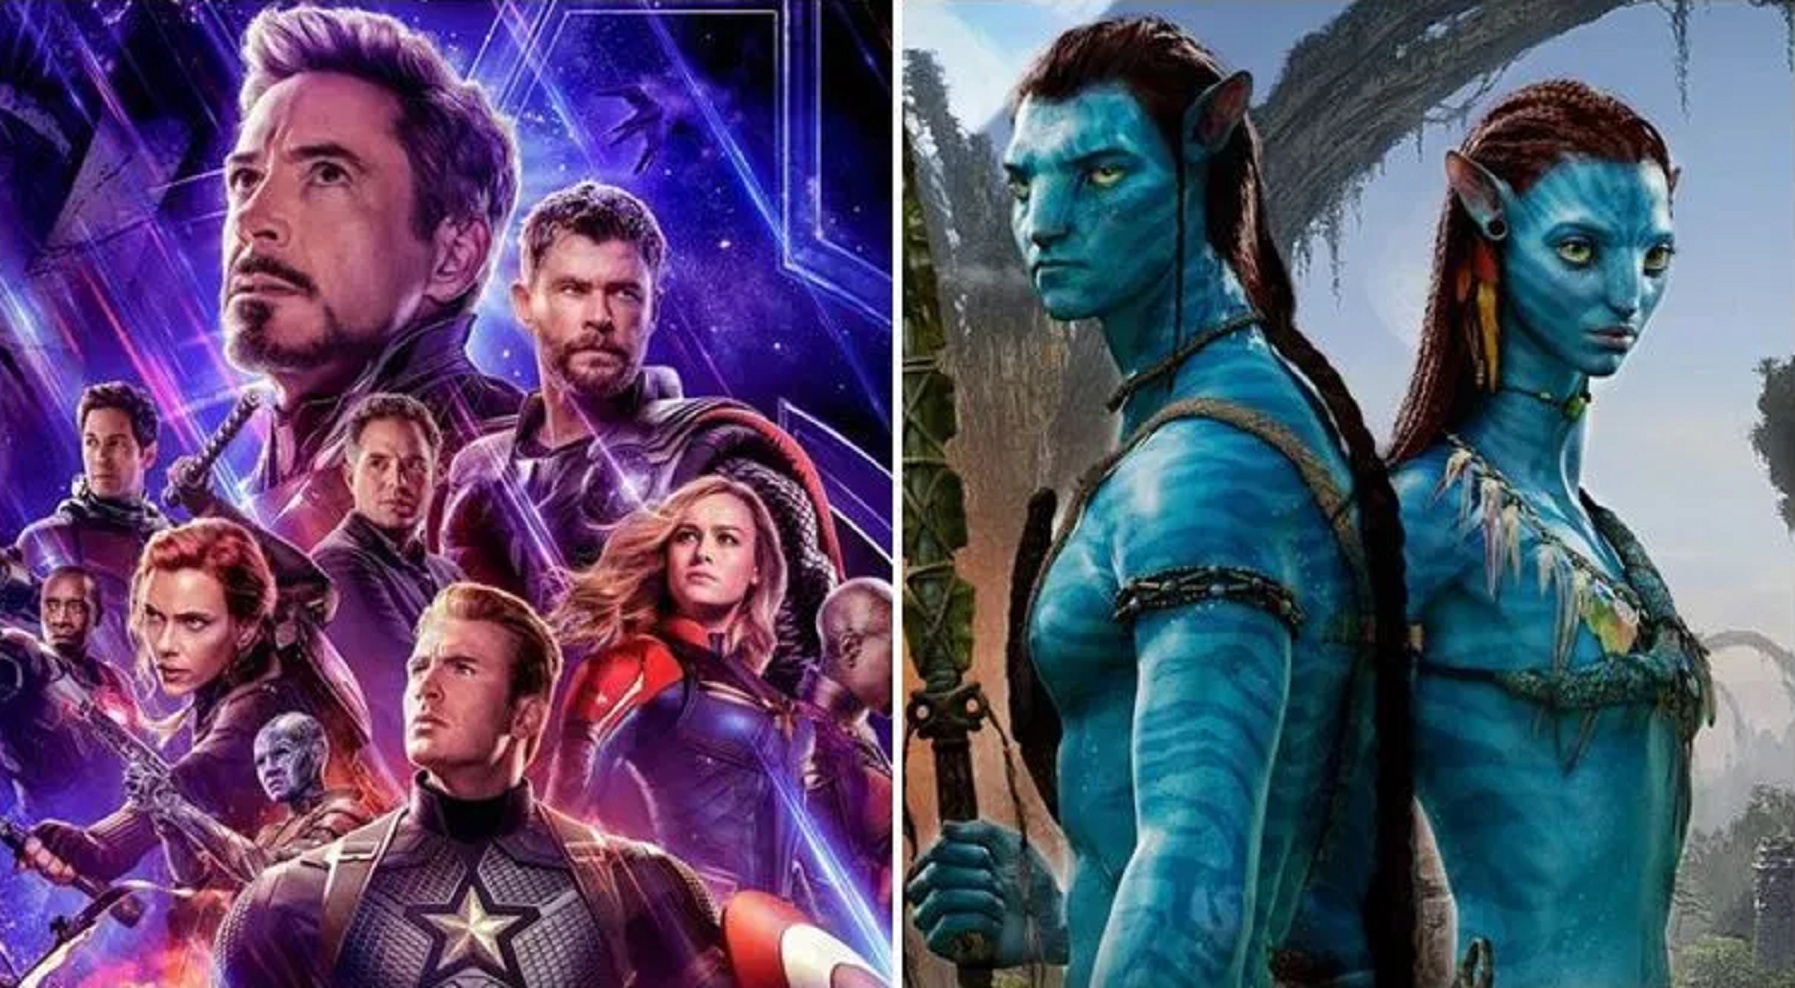 Avengers: Endgame FINALLY Beats Avatar To Become The Highest Grossing Movie In History